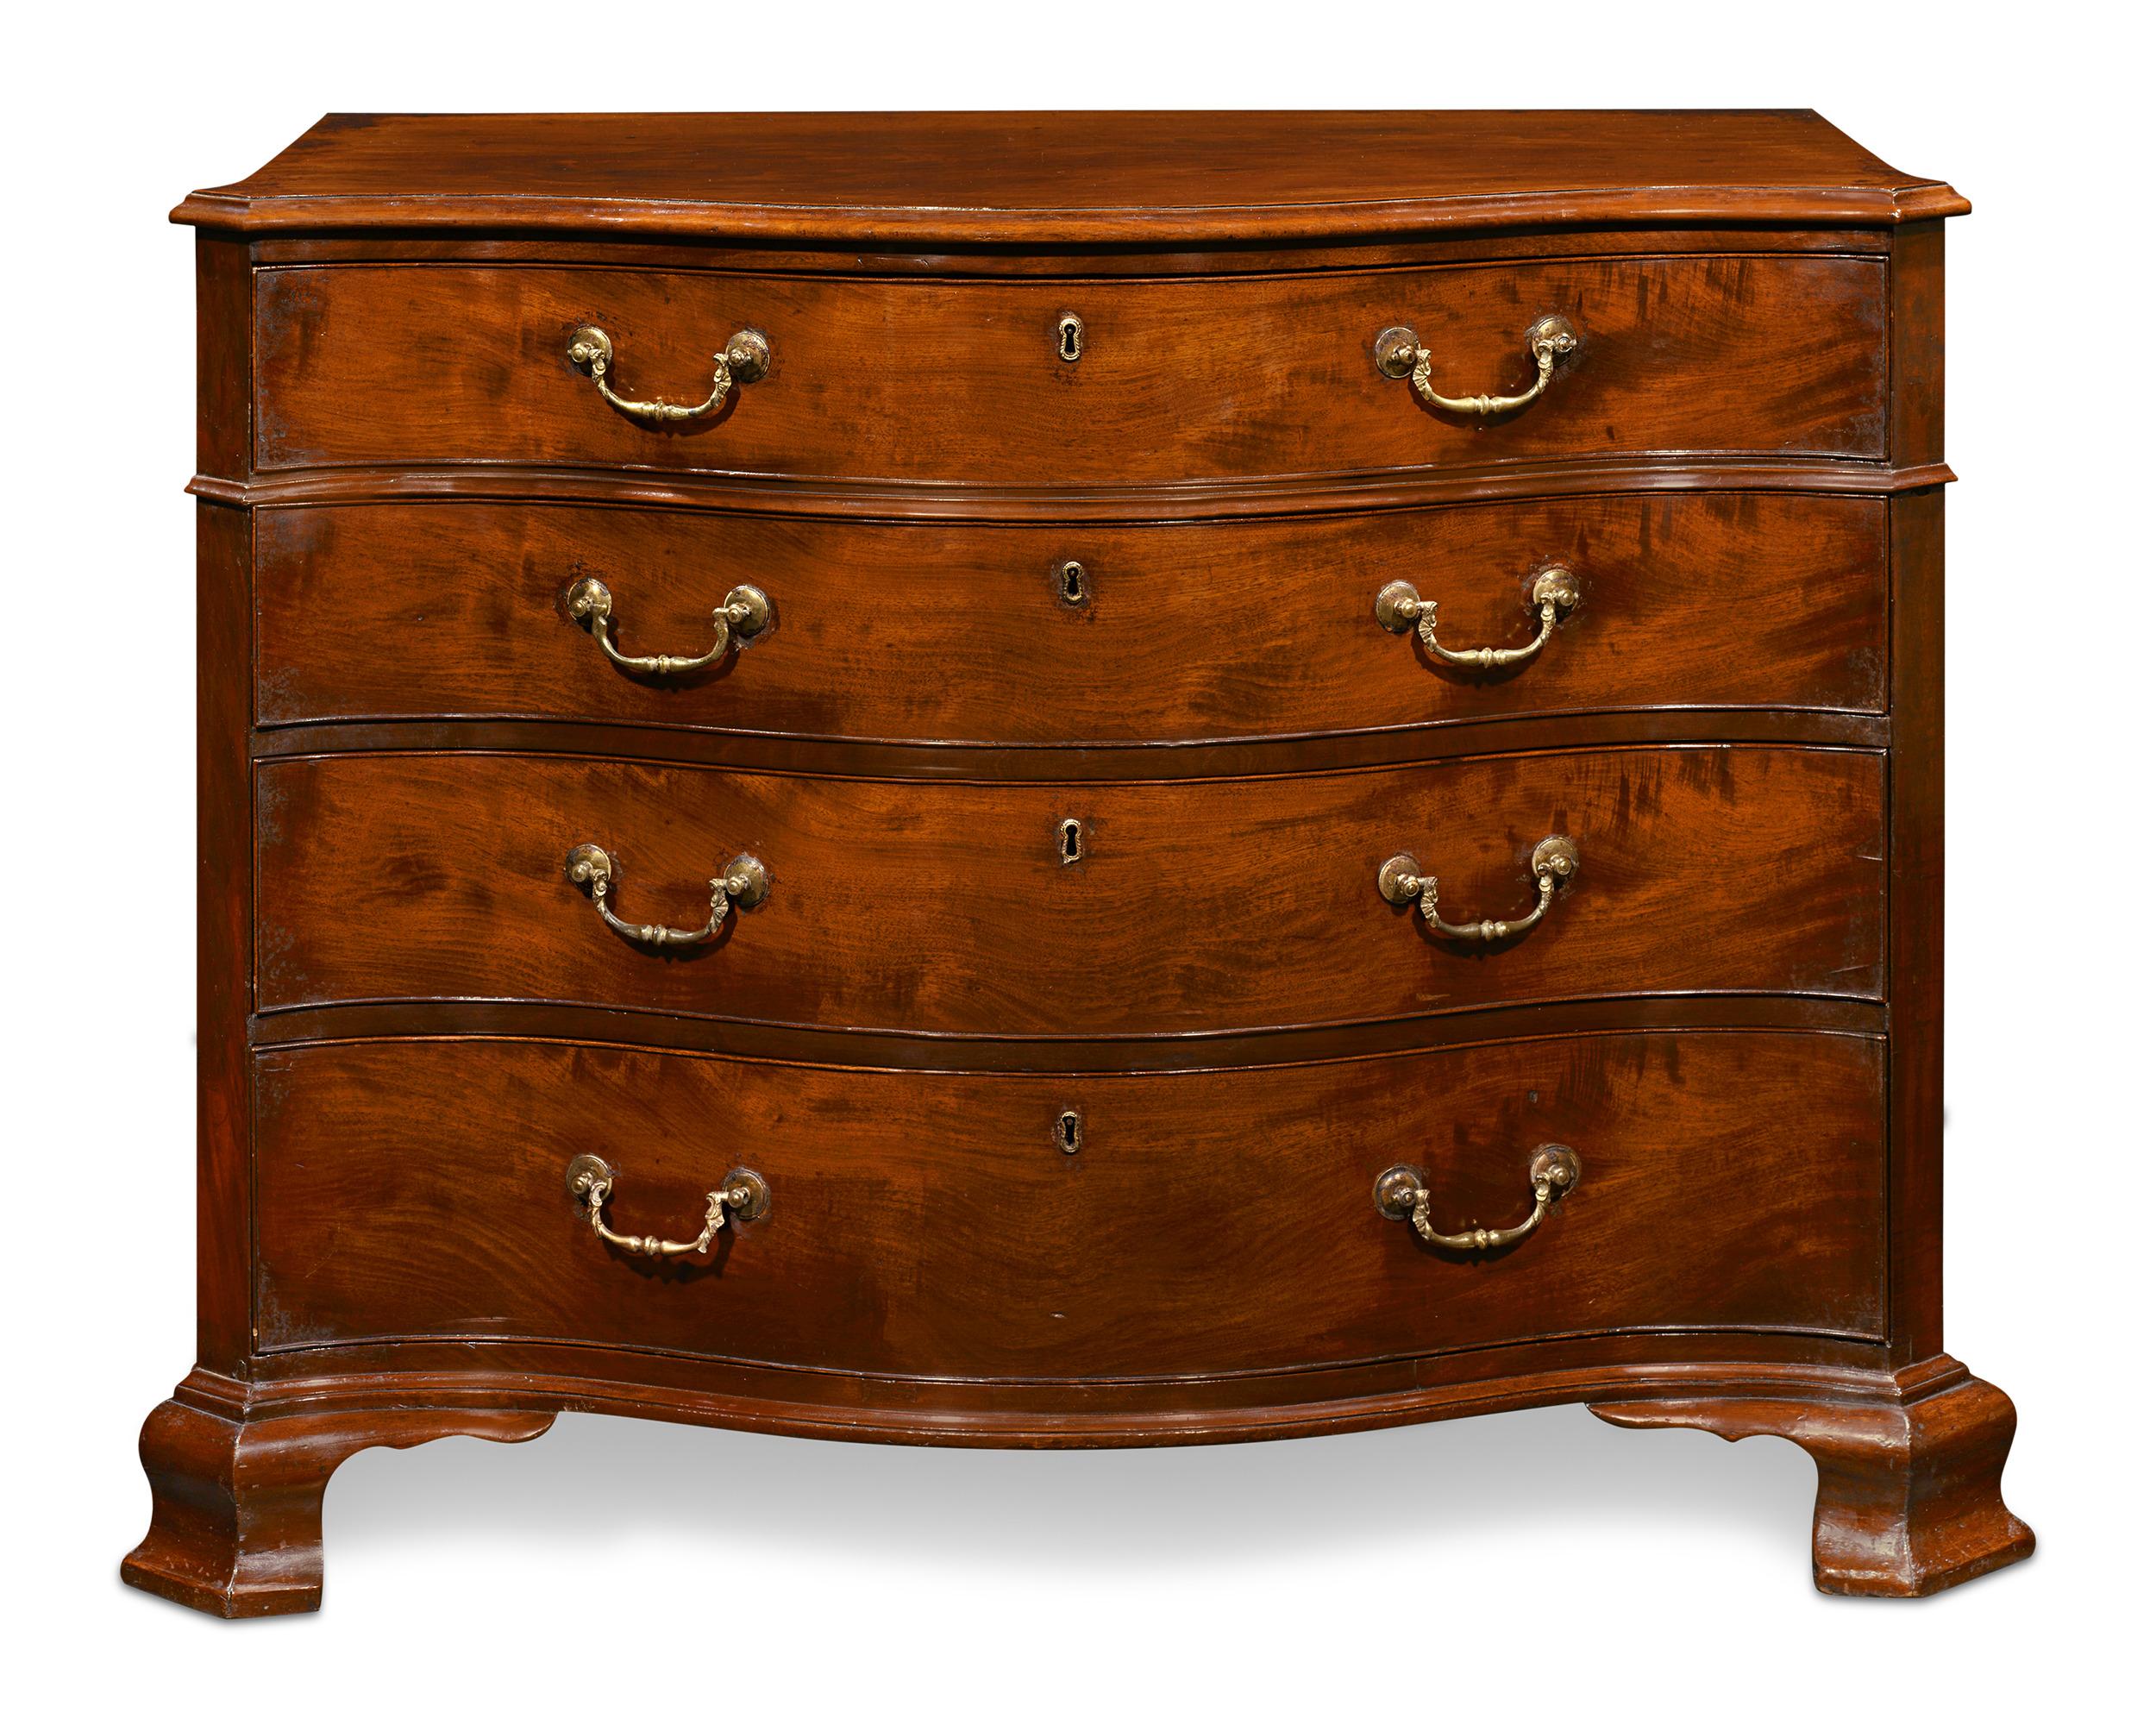 This rare 18th-century serpentine chest of drawers was crafted in the style of the iconic Thomas Chippendale. The George III mahogany dresser is complete with its original brass handles and features four graduated, lockable drawers with keyholes